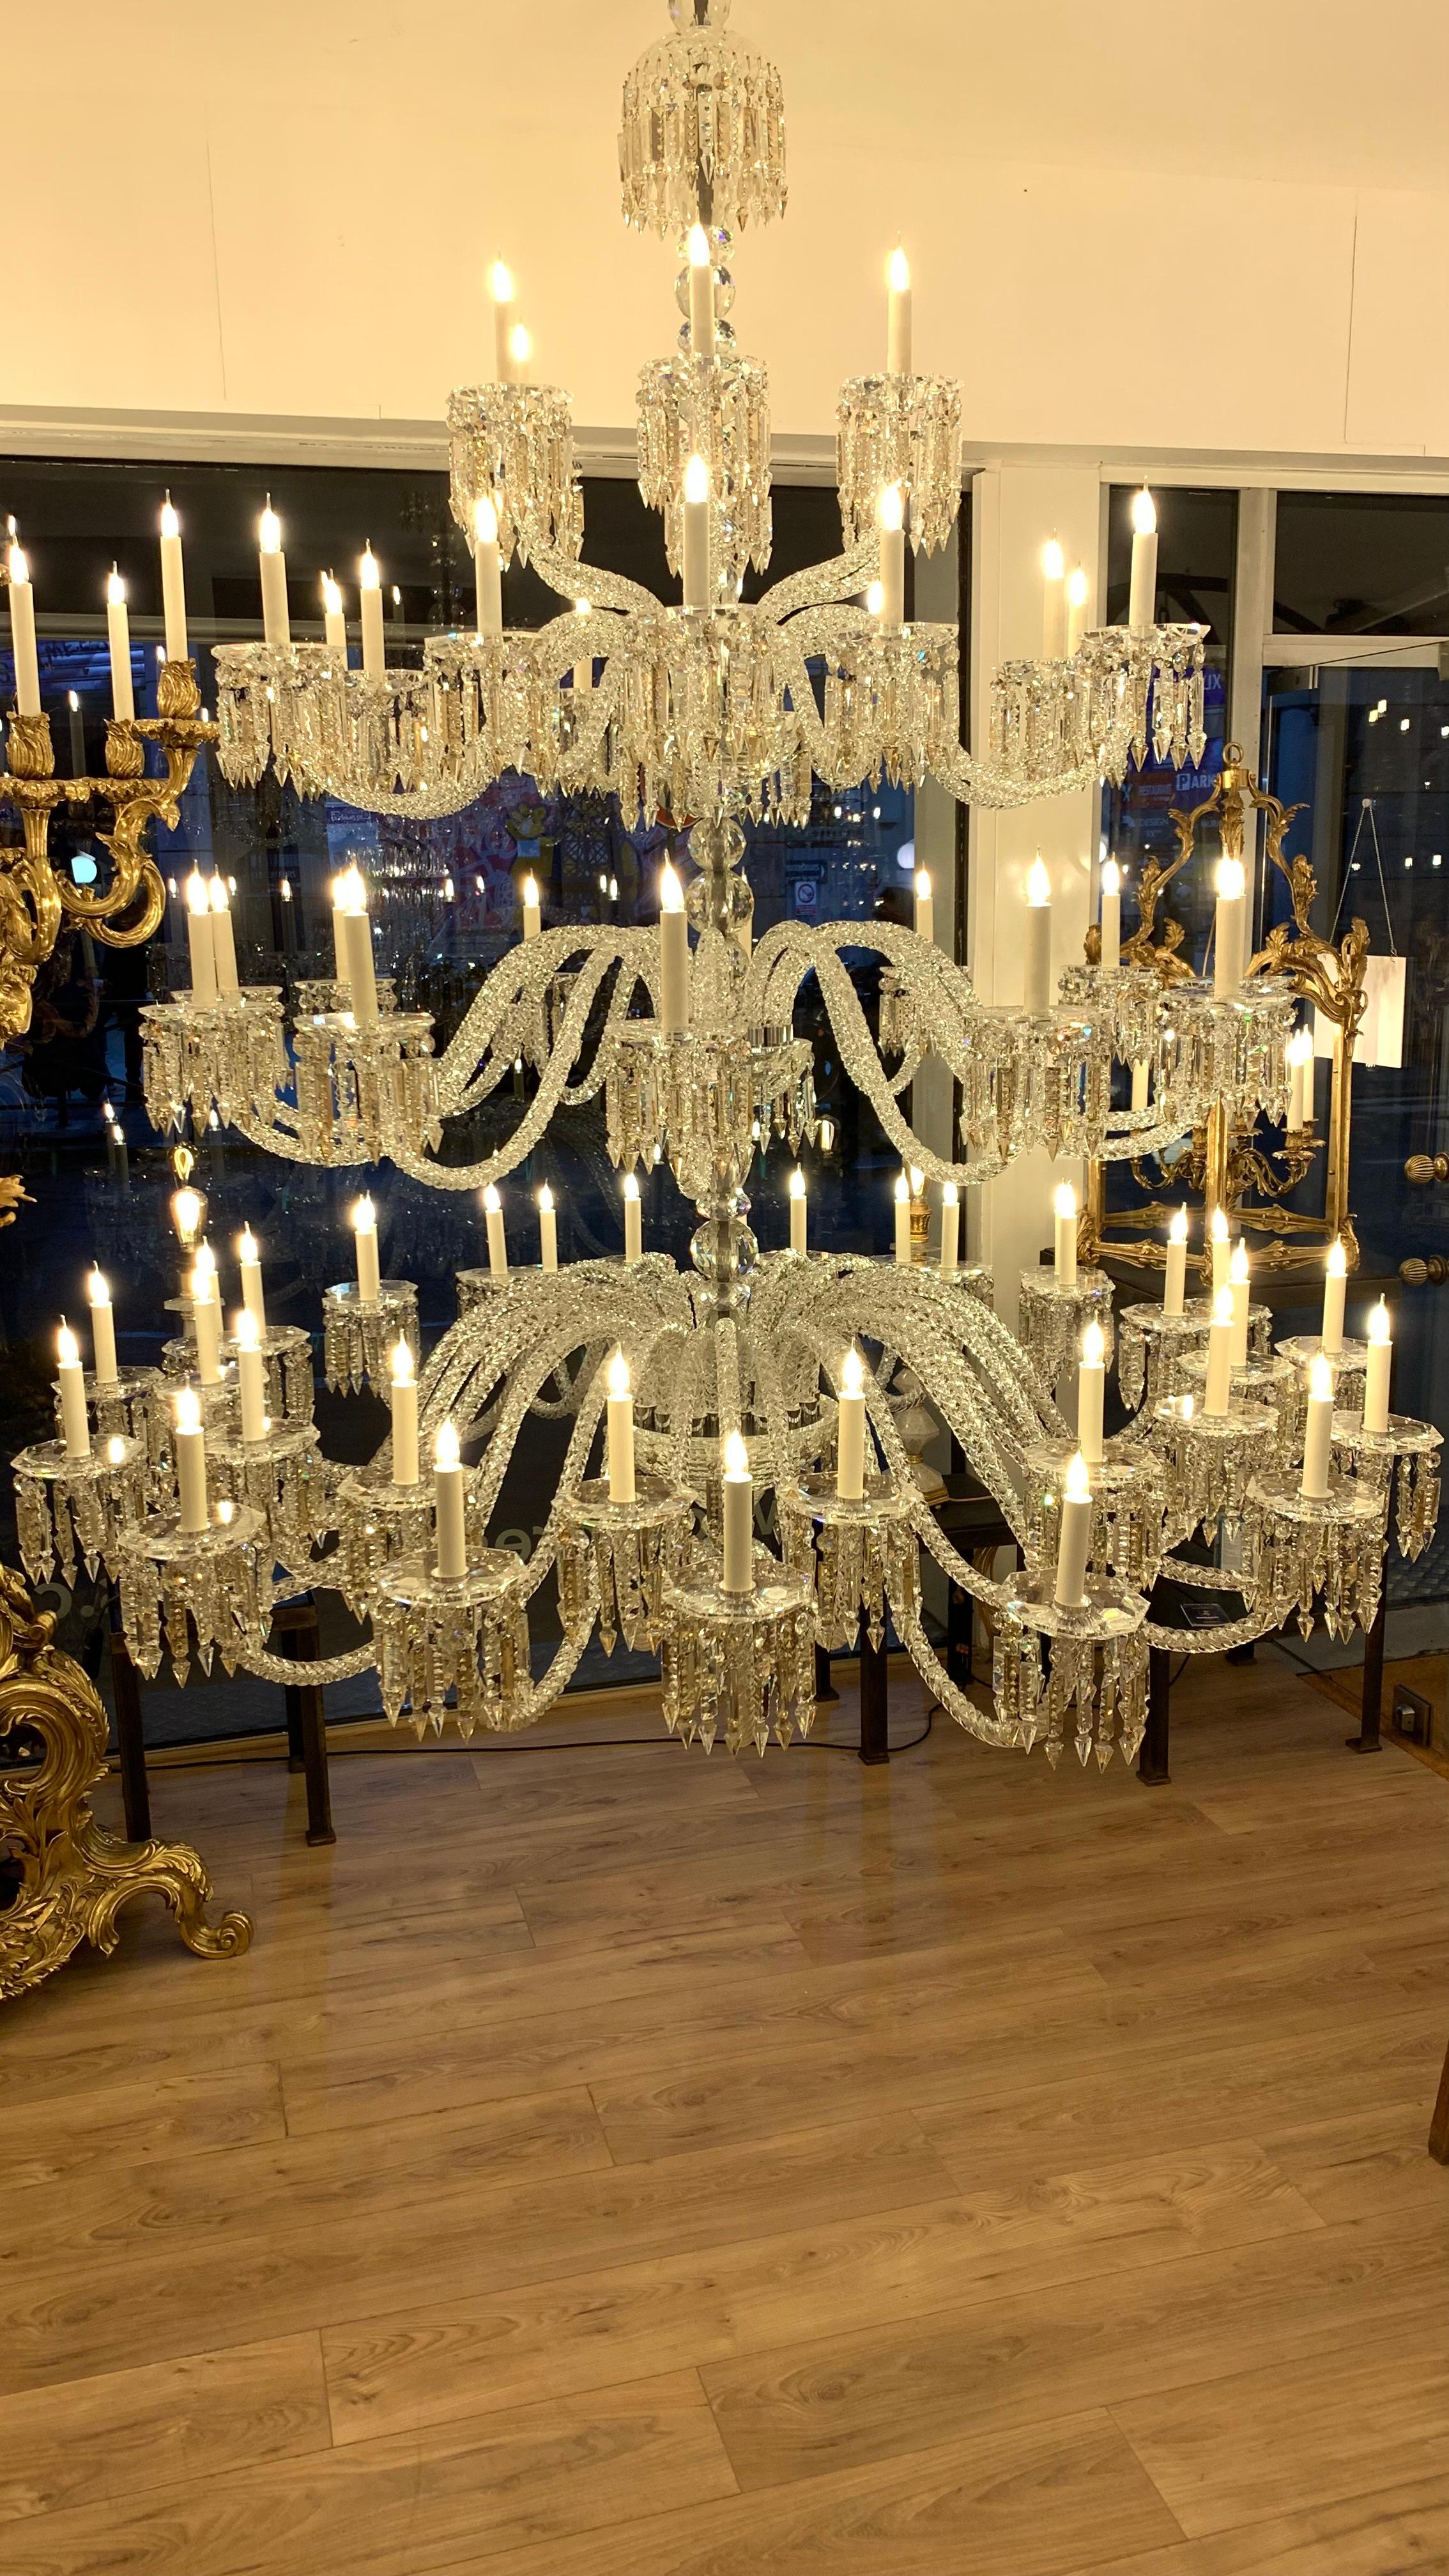 This very large and majestic chandelier is made of solid and hand cut crystal. 
It is divided into three floors. The arms of lights are in twisted glasses. The central barrel is in chromed metal covered by crystal parts.

We have one chandelier in